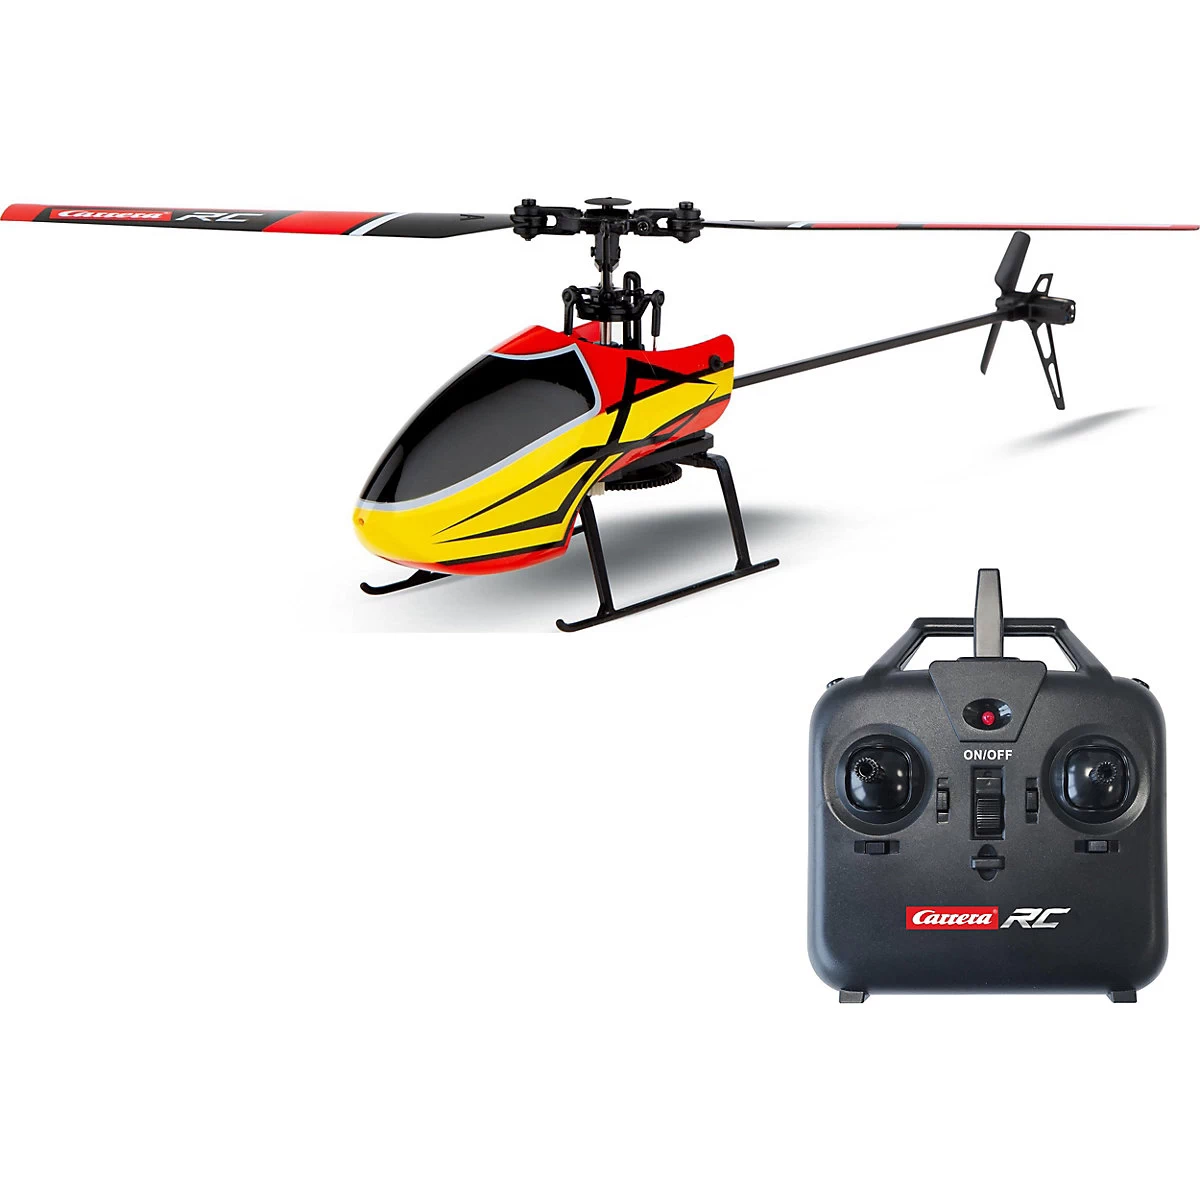 Single Blade Helicopter SX1 (501047)